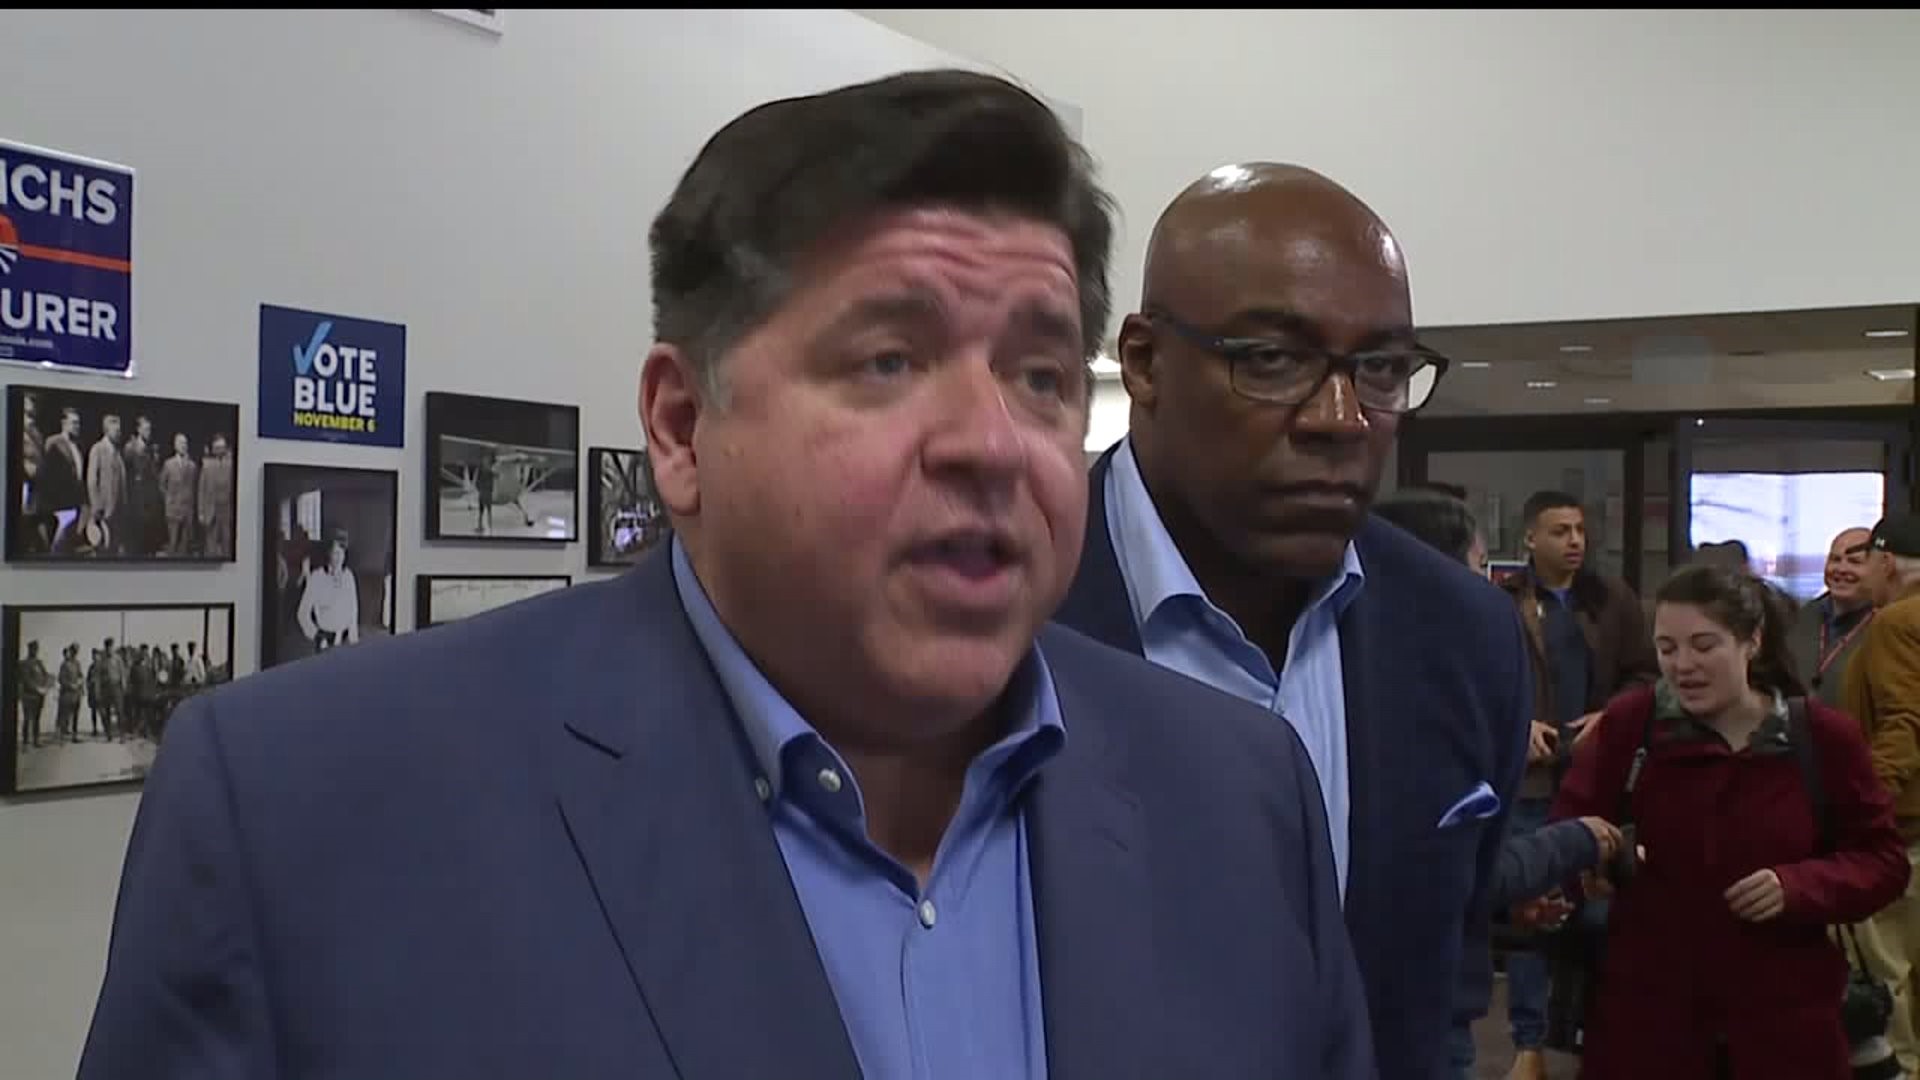 JB Pritzker elected as Illinois governor